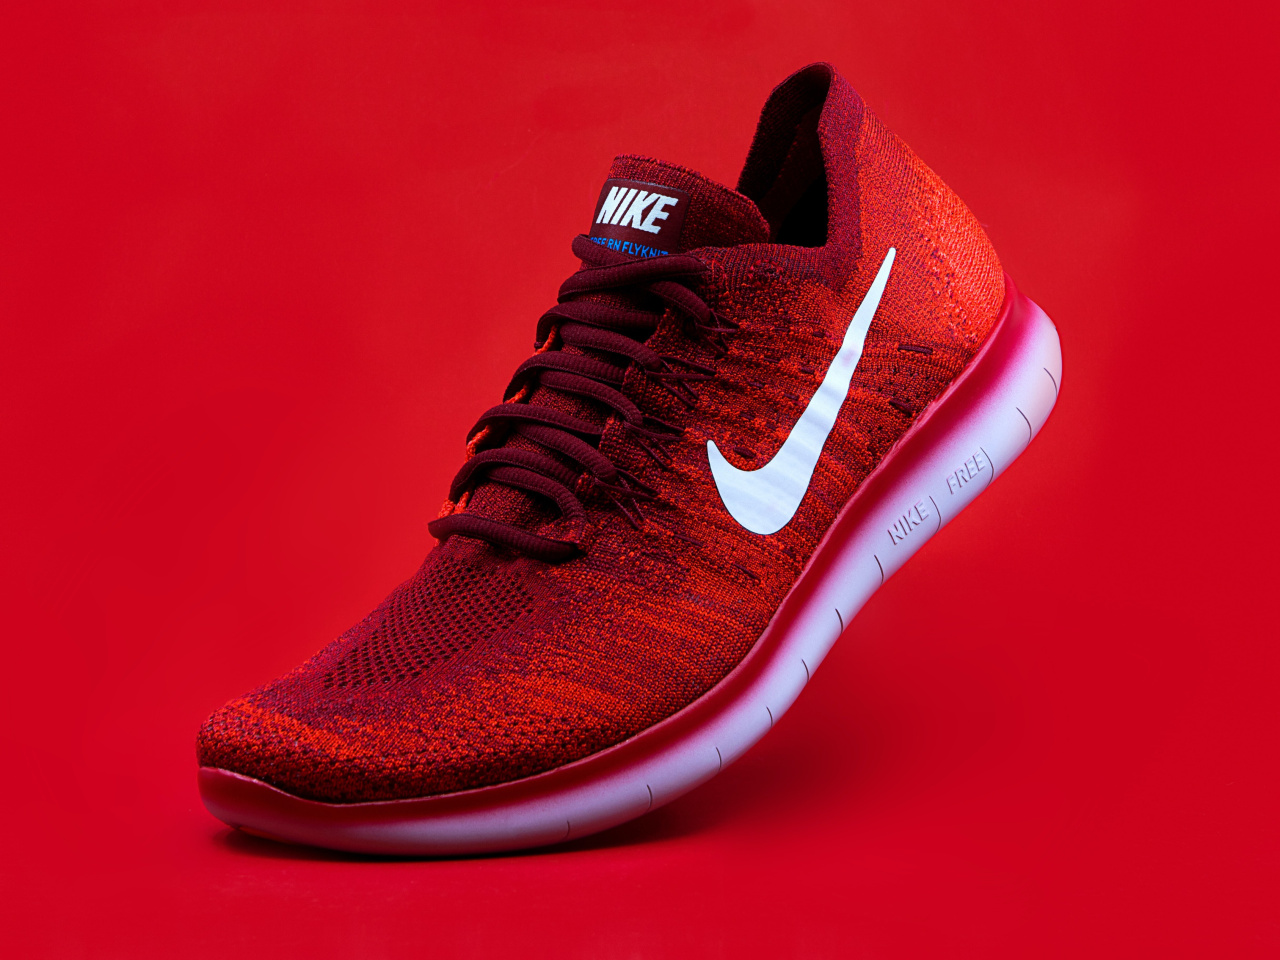 Red Nike Shoes wallpaper 1280x960